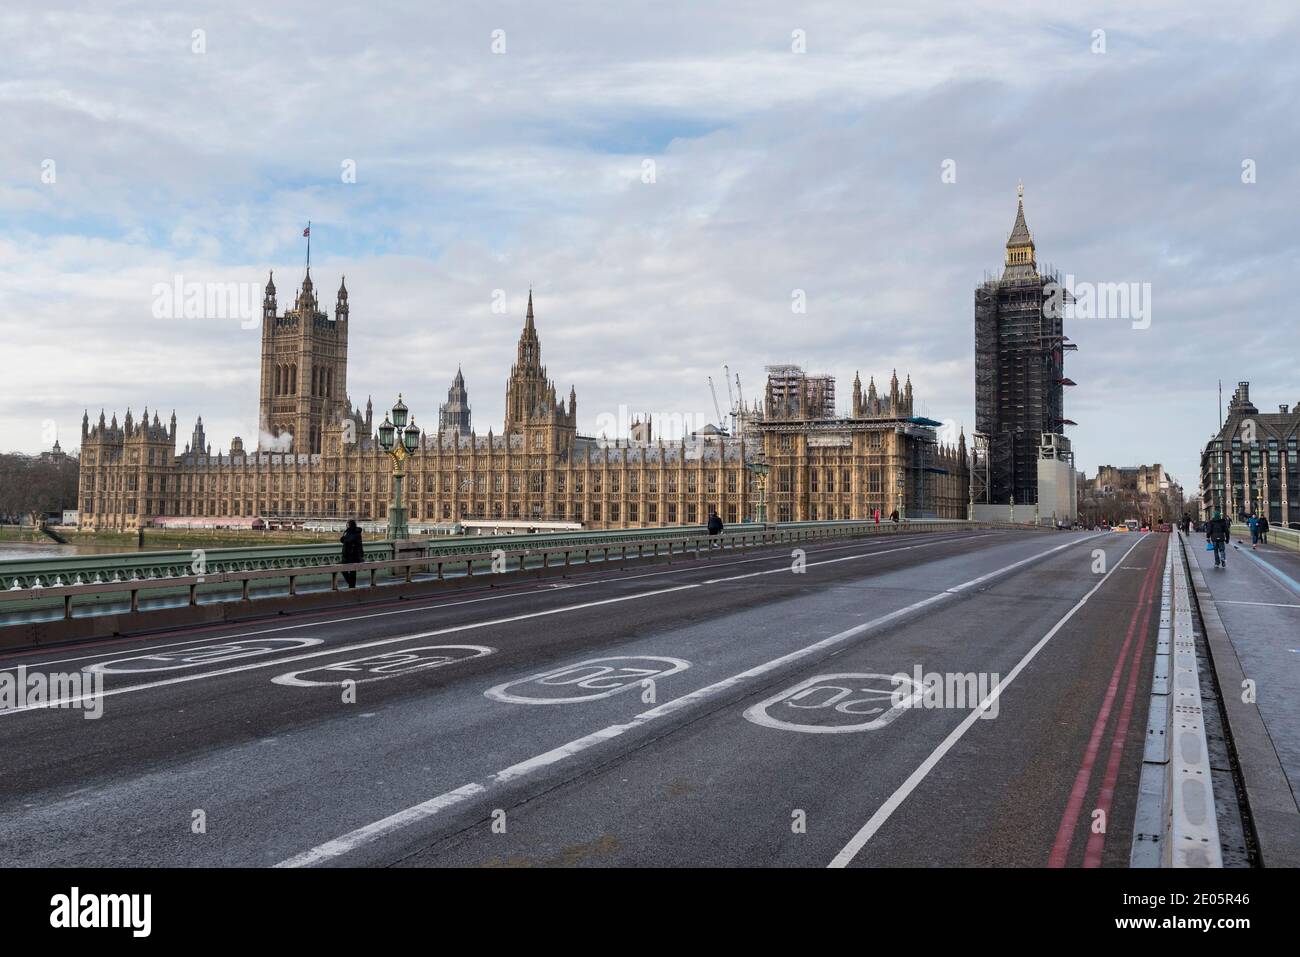 London, UK.  30 December 2020. The Houses of Parliament stand behind pairs of 20 miles per hour speed limit signs on the road on Westminster Bridge which, together, show the year 2020.  As 2020 draws to a close, MPs are due to ratify the UK/EU trade deal in Parliament today.  At the same time, the UK government is trying to tackle the effects of the record levels of coronavirus cases which may require an increase in national tier alert levels.  Credit: Stephen Chung / Alamy Live News Stock Photo